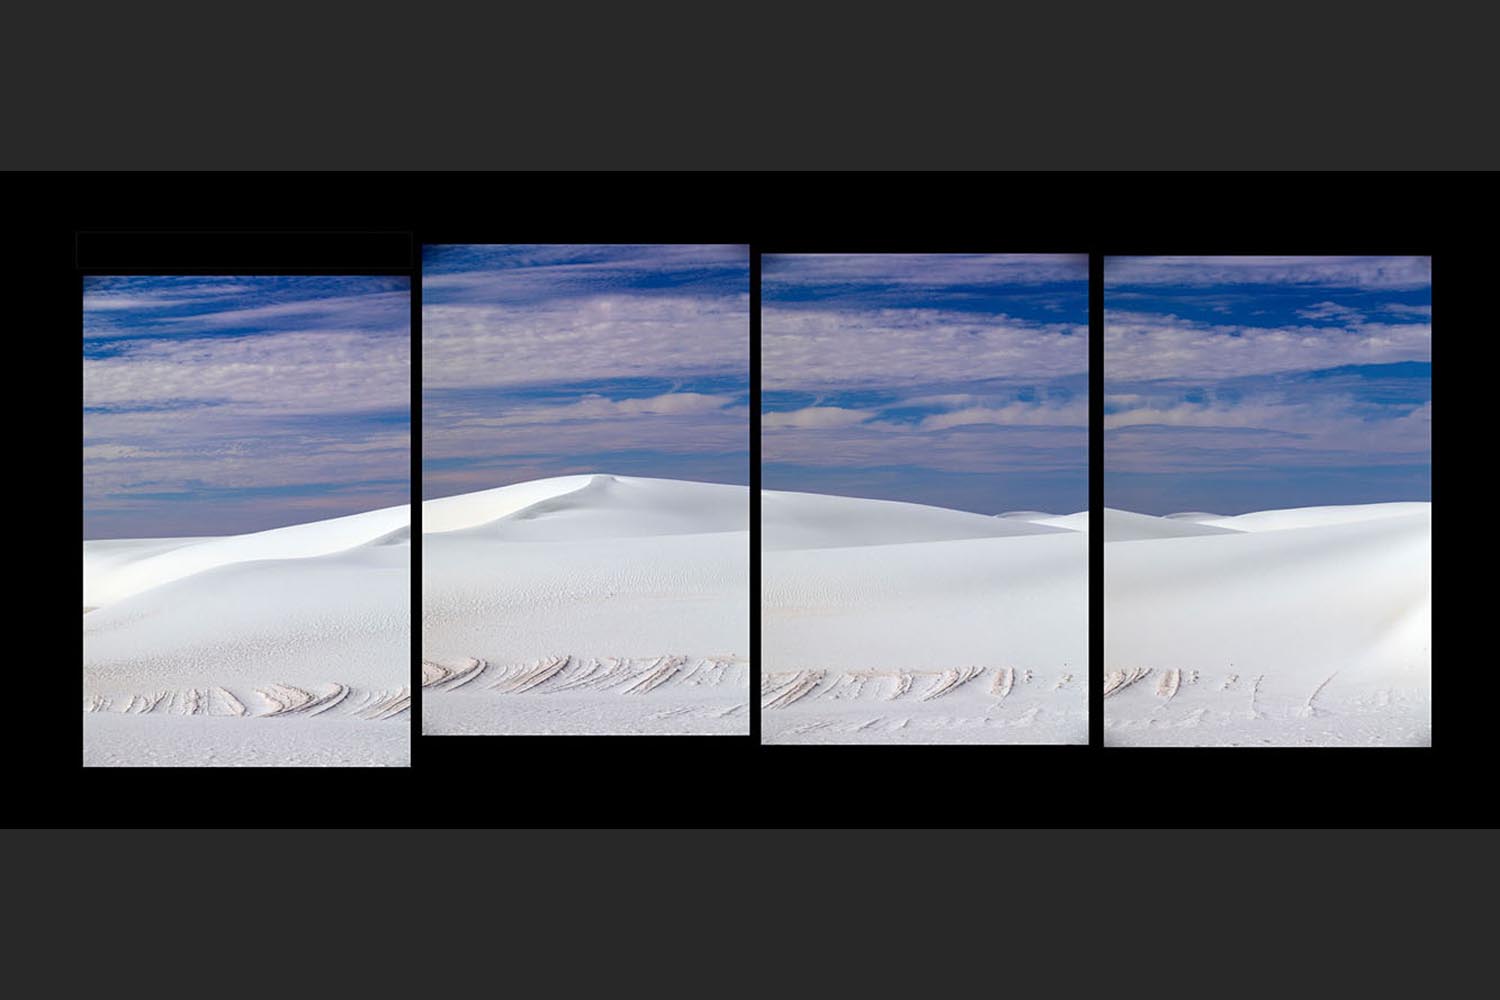 George Craig: White Sands Pan - White Sands, New Mexico